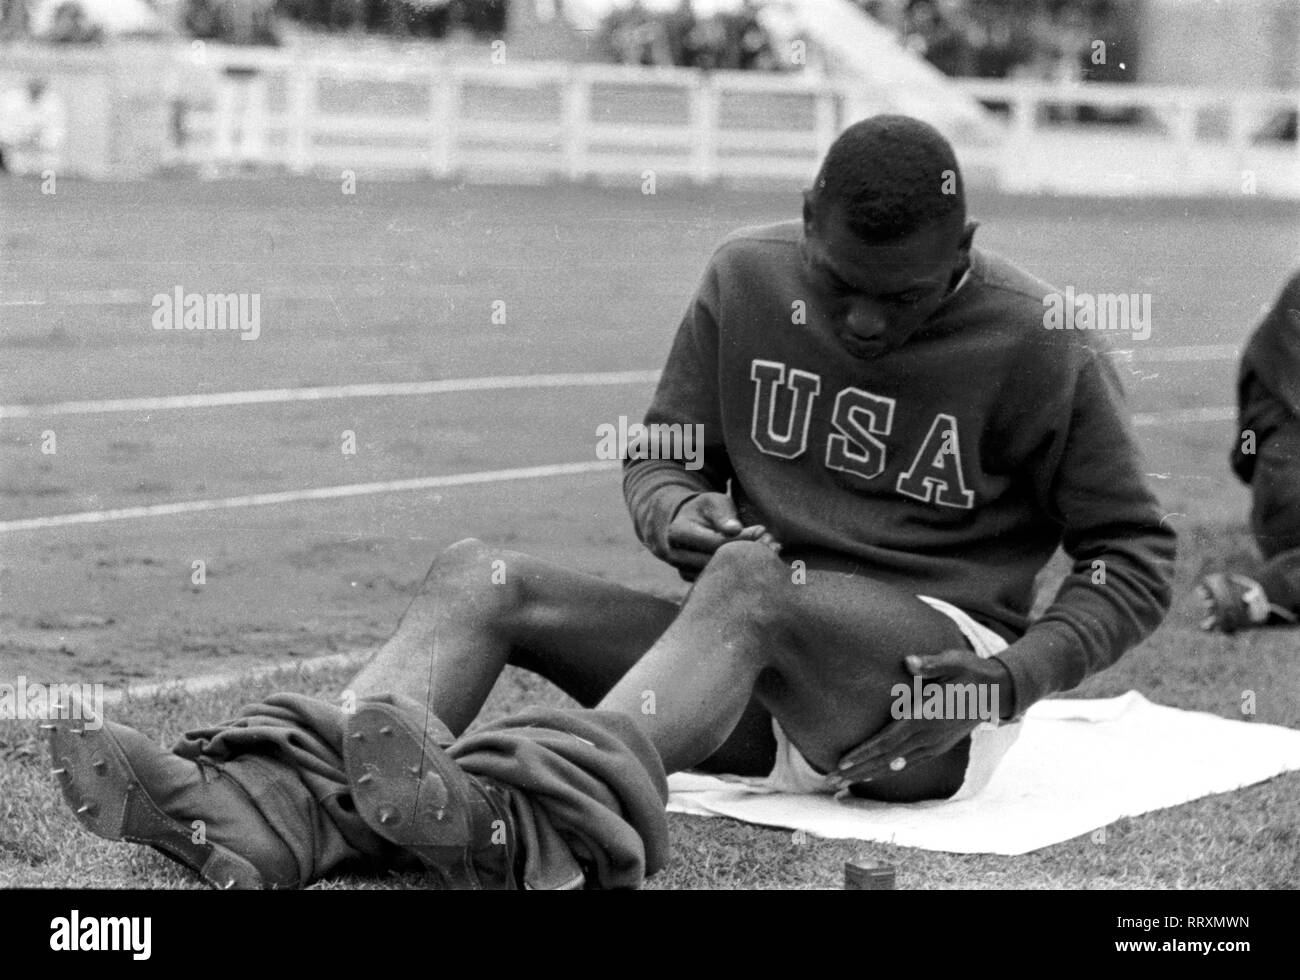 Summer Olympics 1936 - Germany, Third Reich - Olympic Games, Summer Olympics 1936 in Berlin. Jesse Owens during a break at the Olympic arena. The most successful athlete of the Berlin Olympics. Gold medal winner in 100 m and 200 m sprint, 4 x 100 m relay and long jump. Image date August  1936. Photo Erich Andres Stock Photo